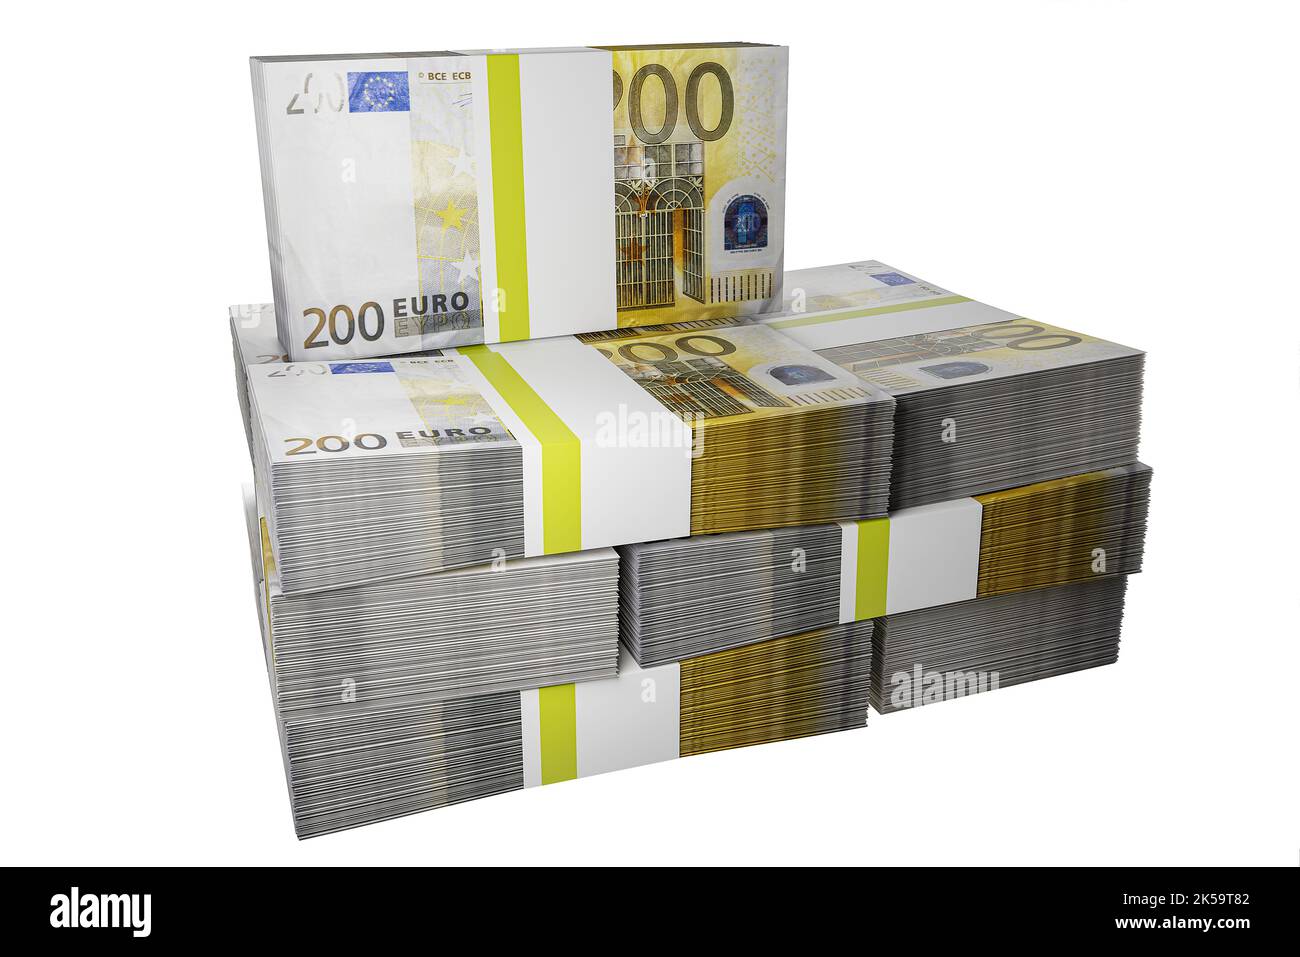 stack of bundles of 200 euro notes background piles of 200 euros banknotes two hundred euros Stock Photo